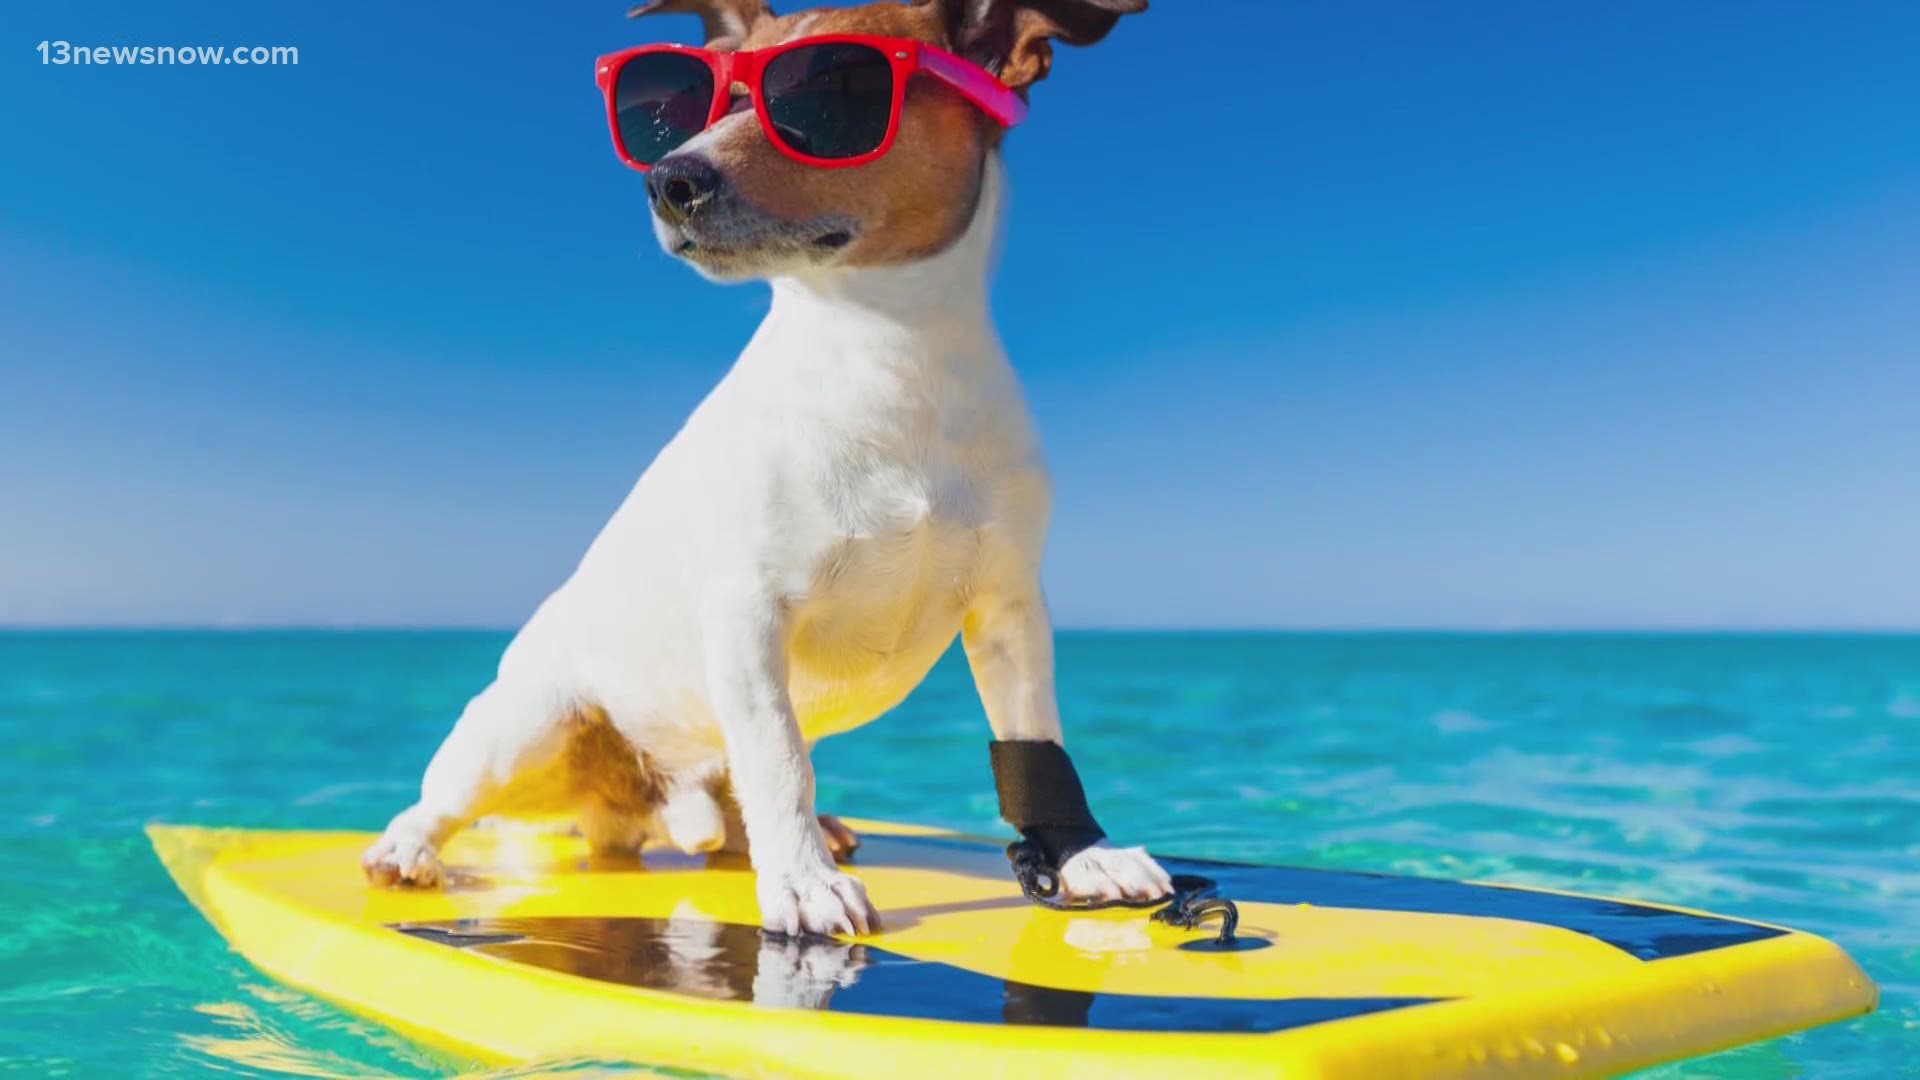 Who doesn’t love a beach day? To keep your pets safe this summer, we talked with veterinarian Denette Cooke about ways to keep your dog beach days fun.